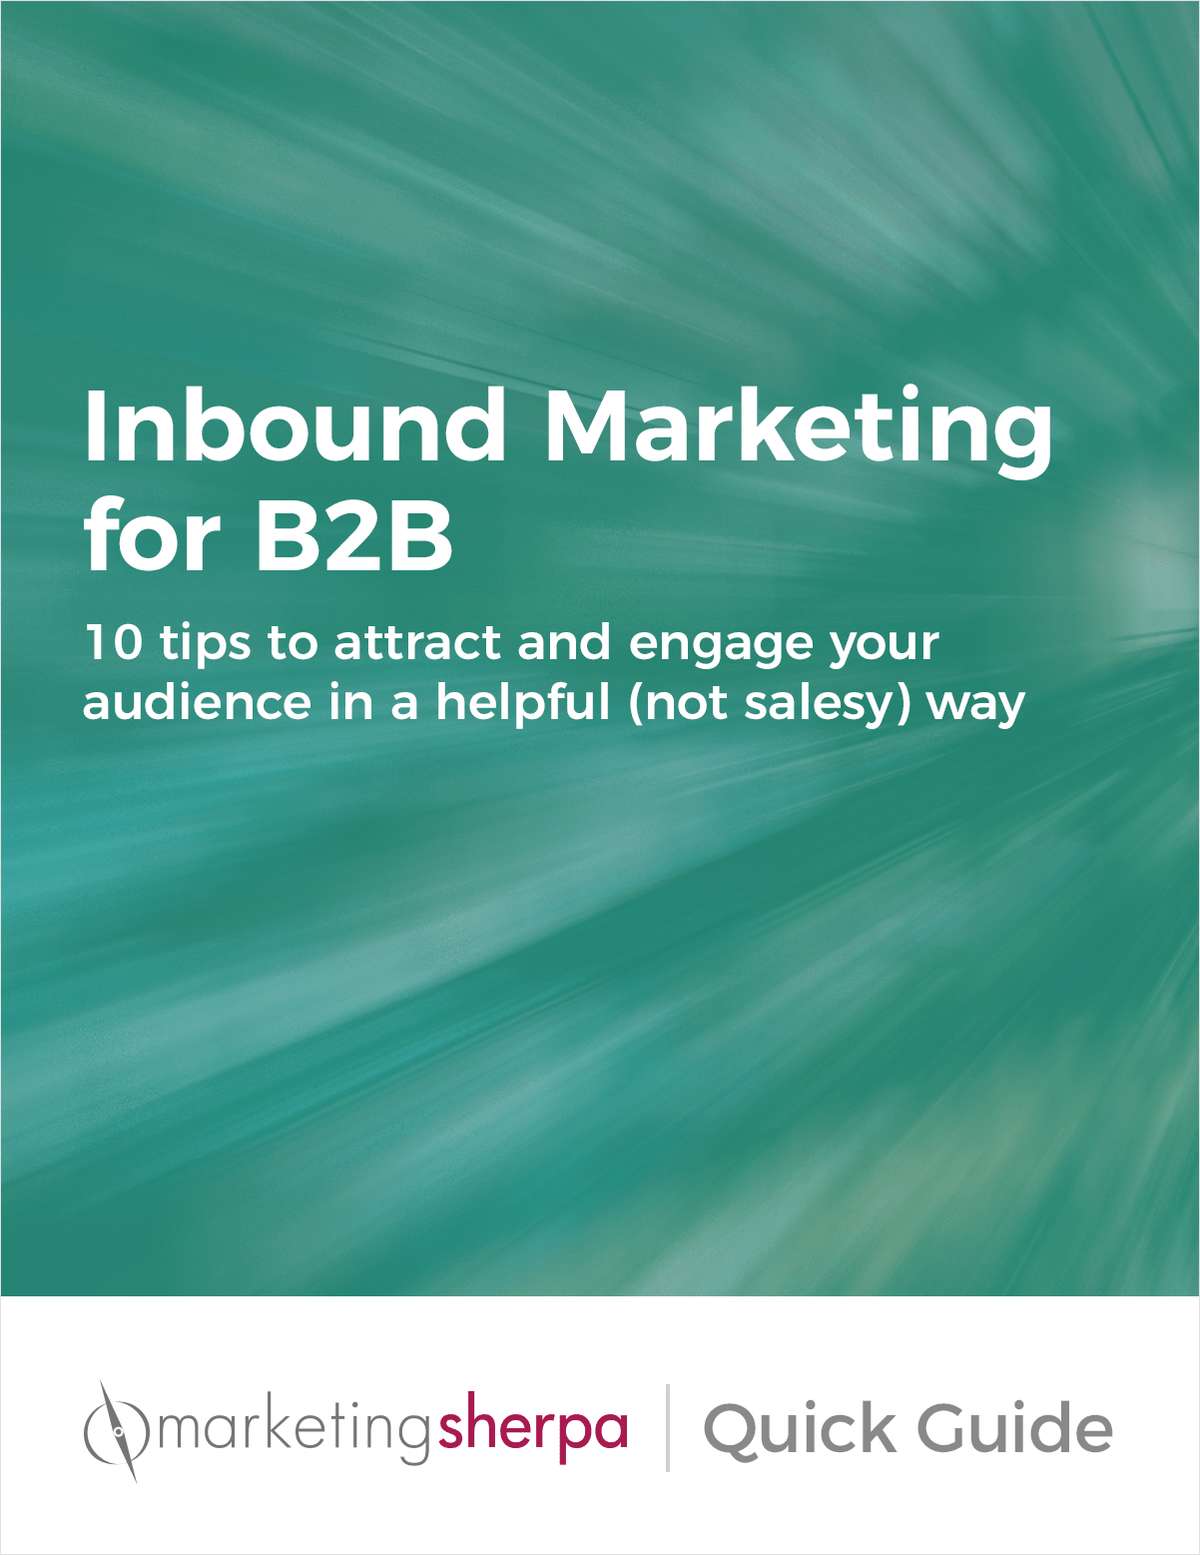 Quick Guide to Inbound Marketing for B2B